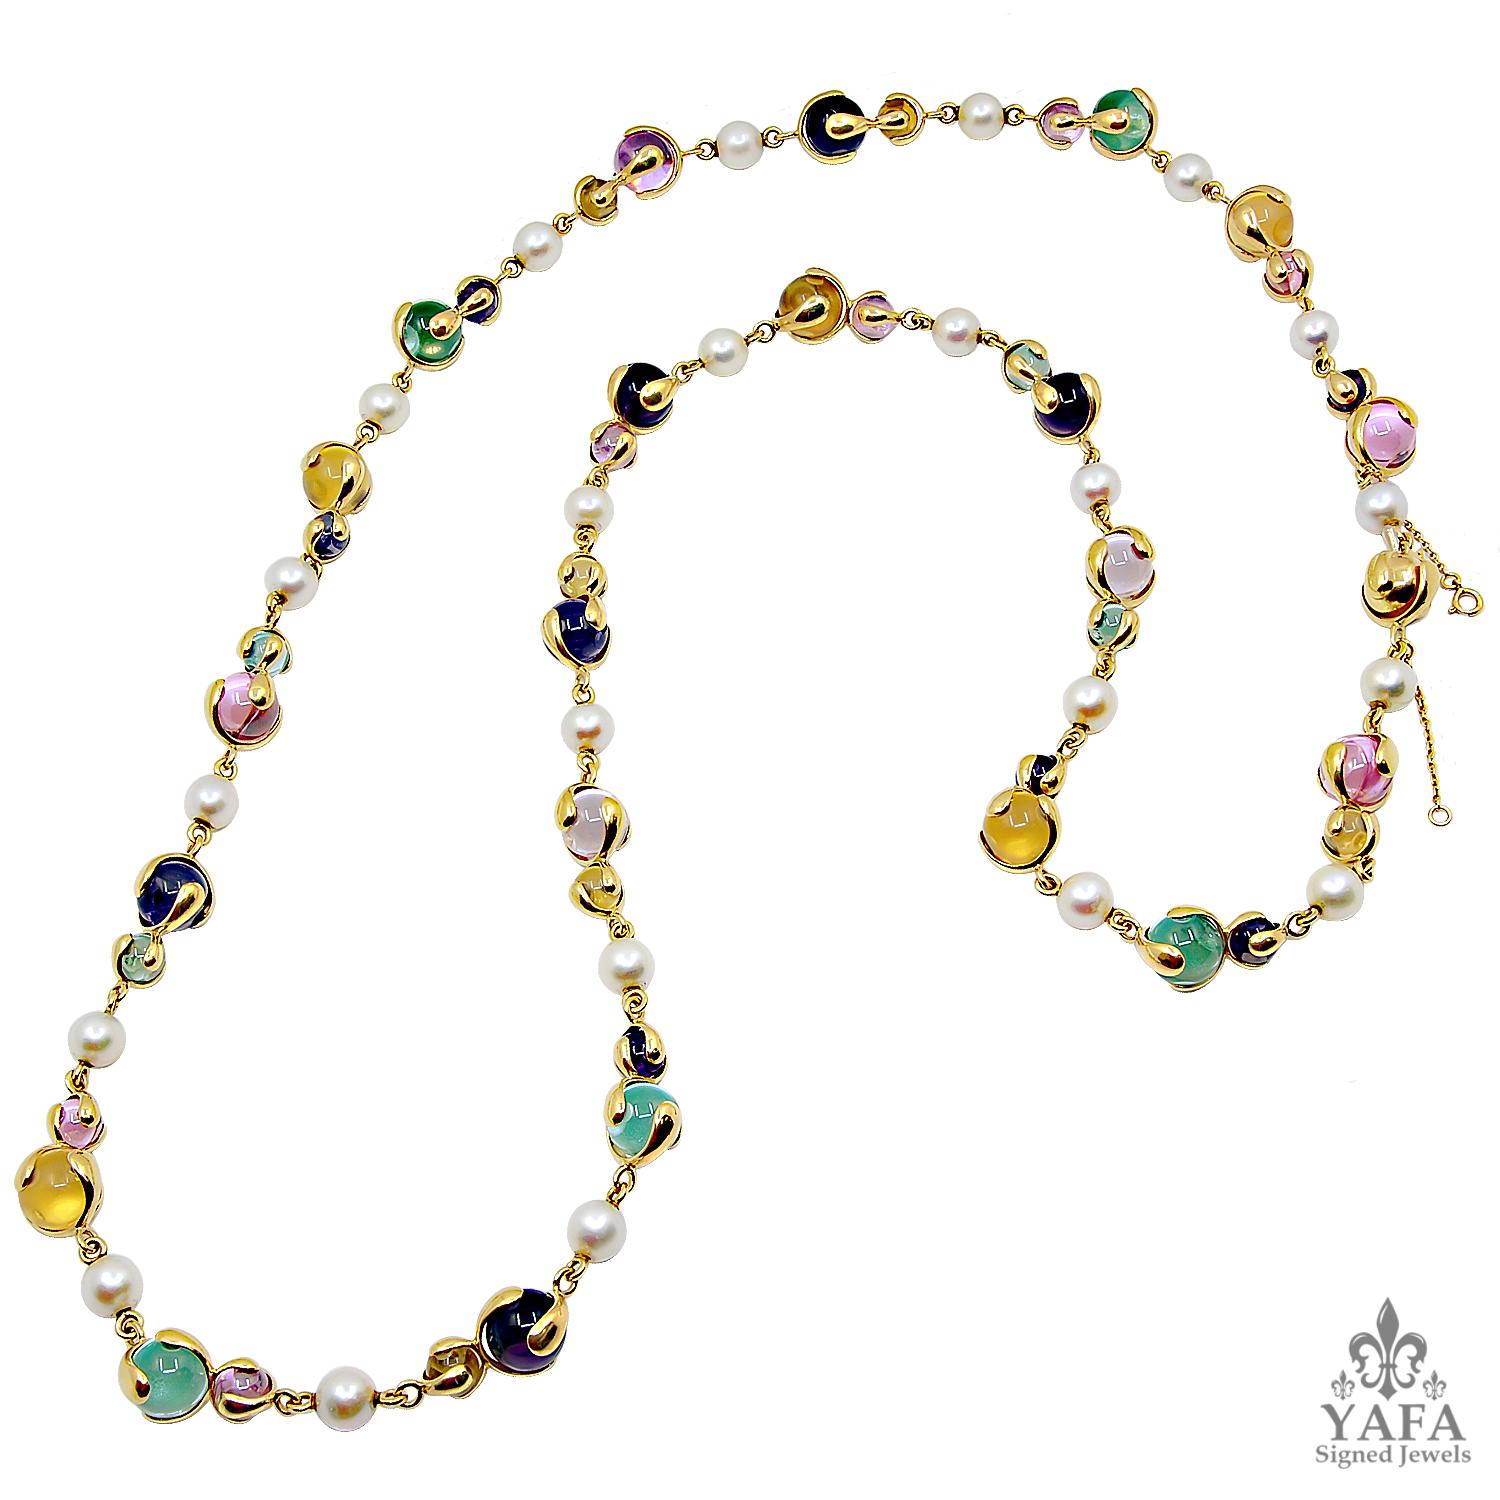 Marina B. Semi Precious Bead Gold Long Necklace
An 18k yellow gold long necklace with pearl, quartz, amethyst and citrine, signed Marina B.
total length is approx. 36″ long
Signed “Marina B”; circa 1980s
